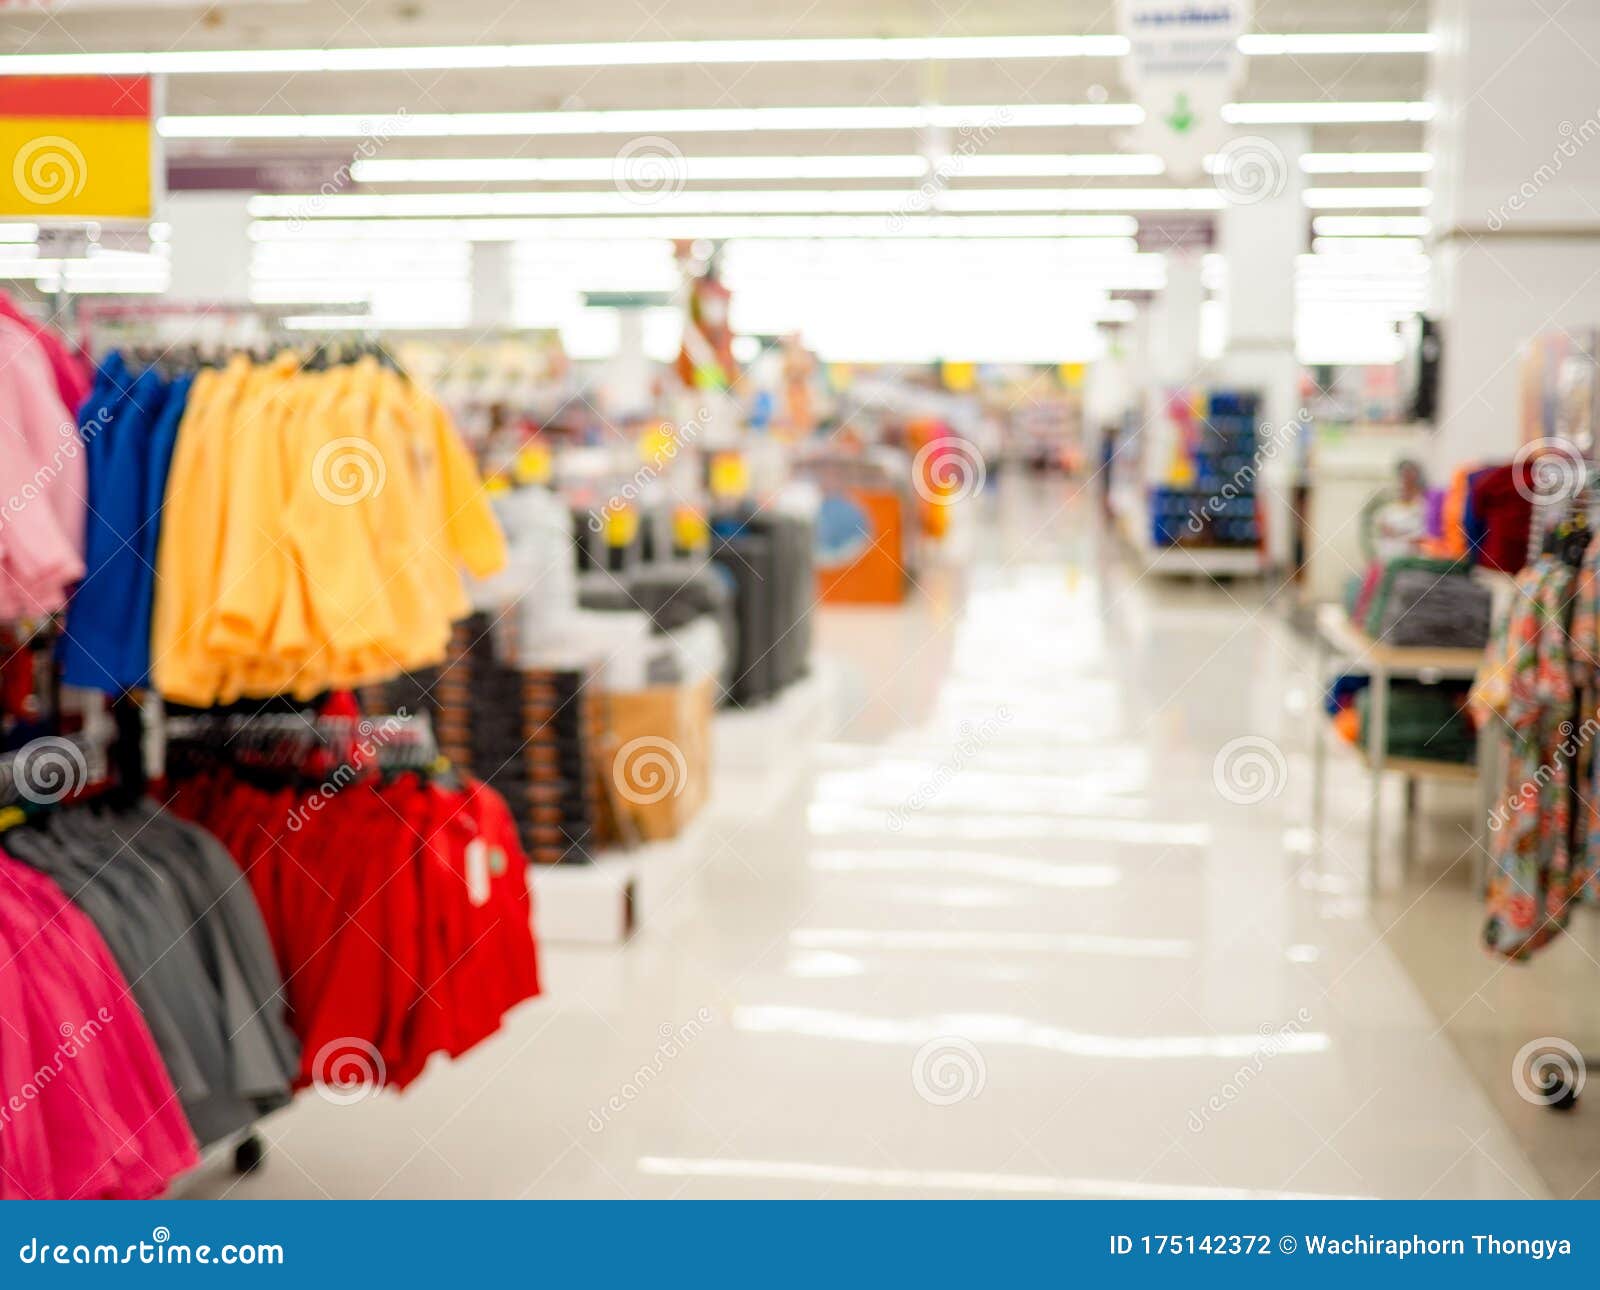 department of clothing sales in supermarkets, blurred shopping mall and retails store interior for background.